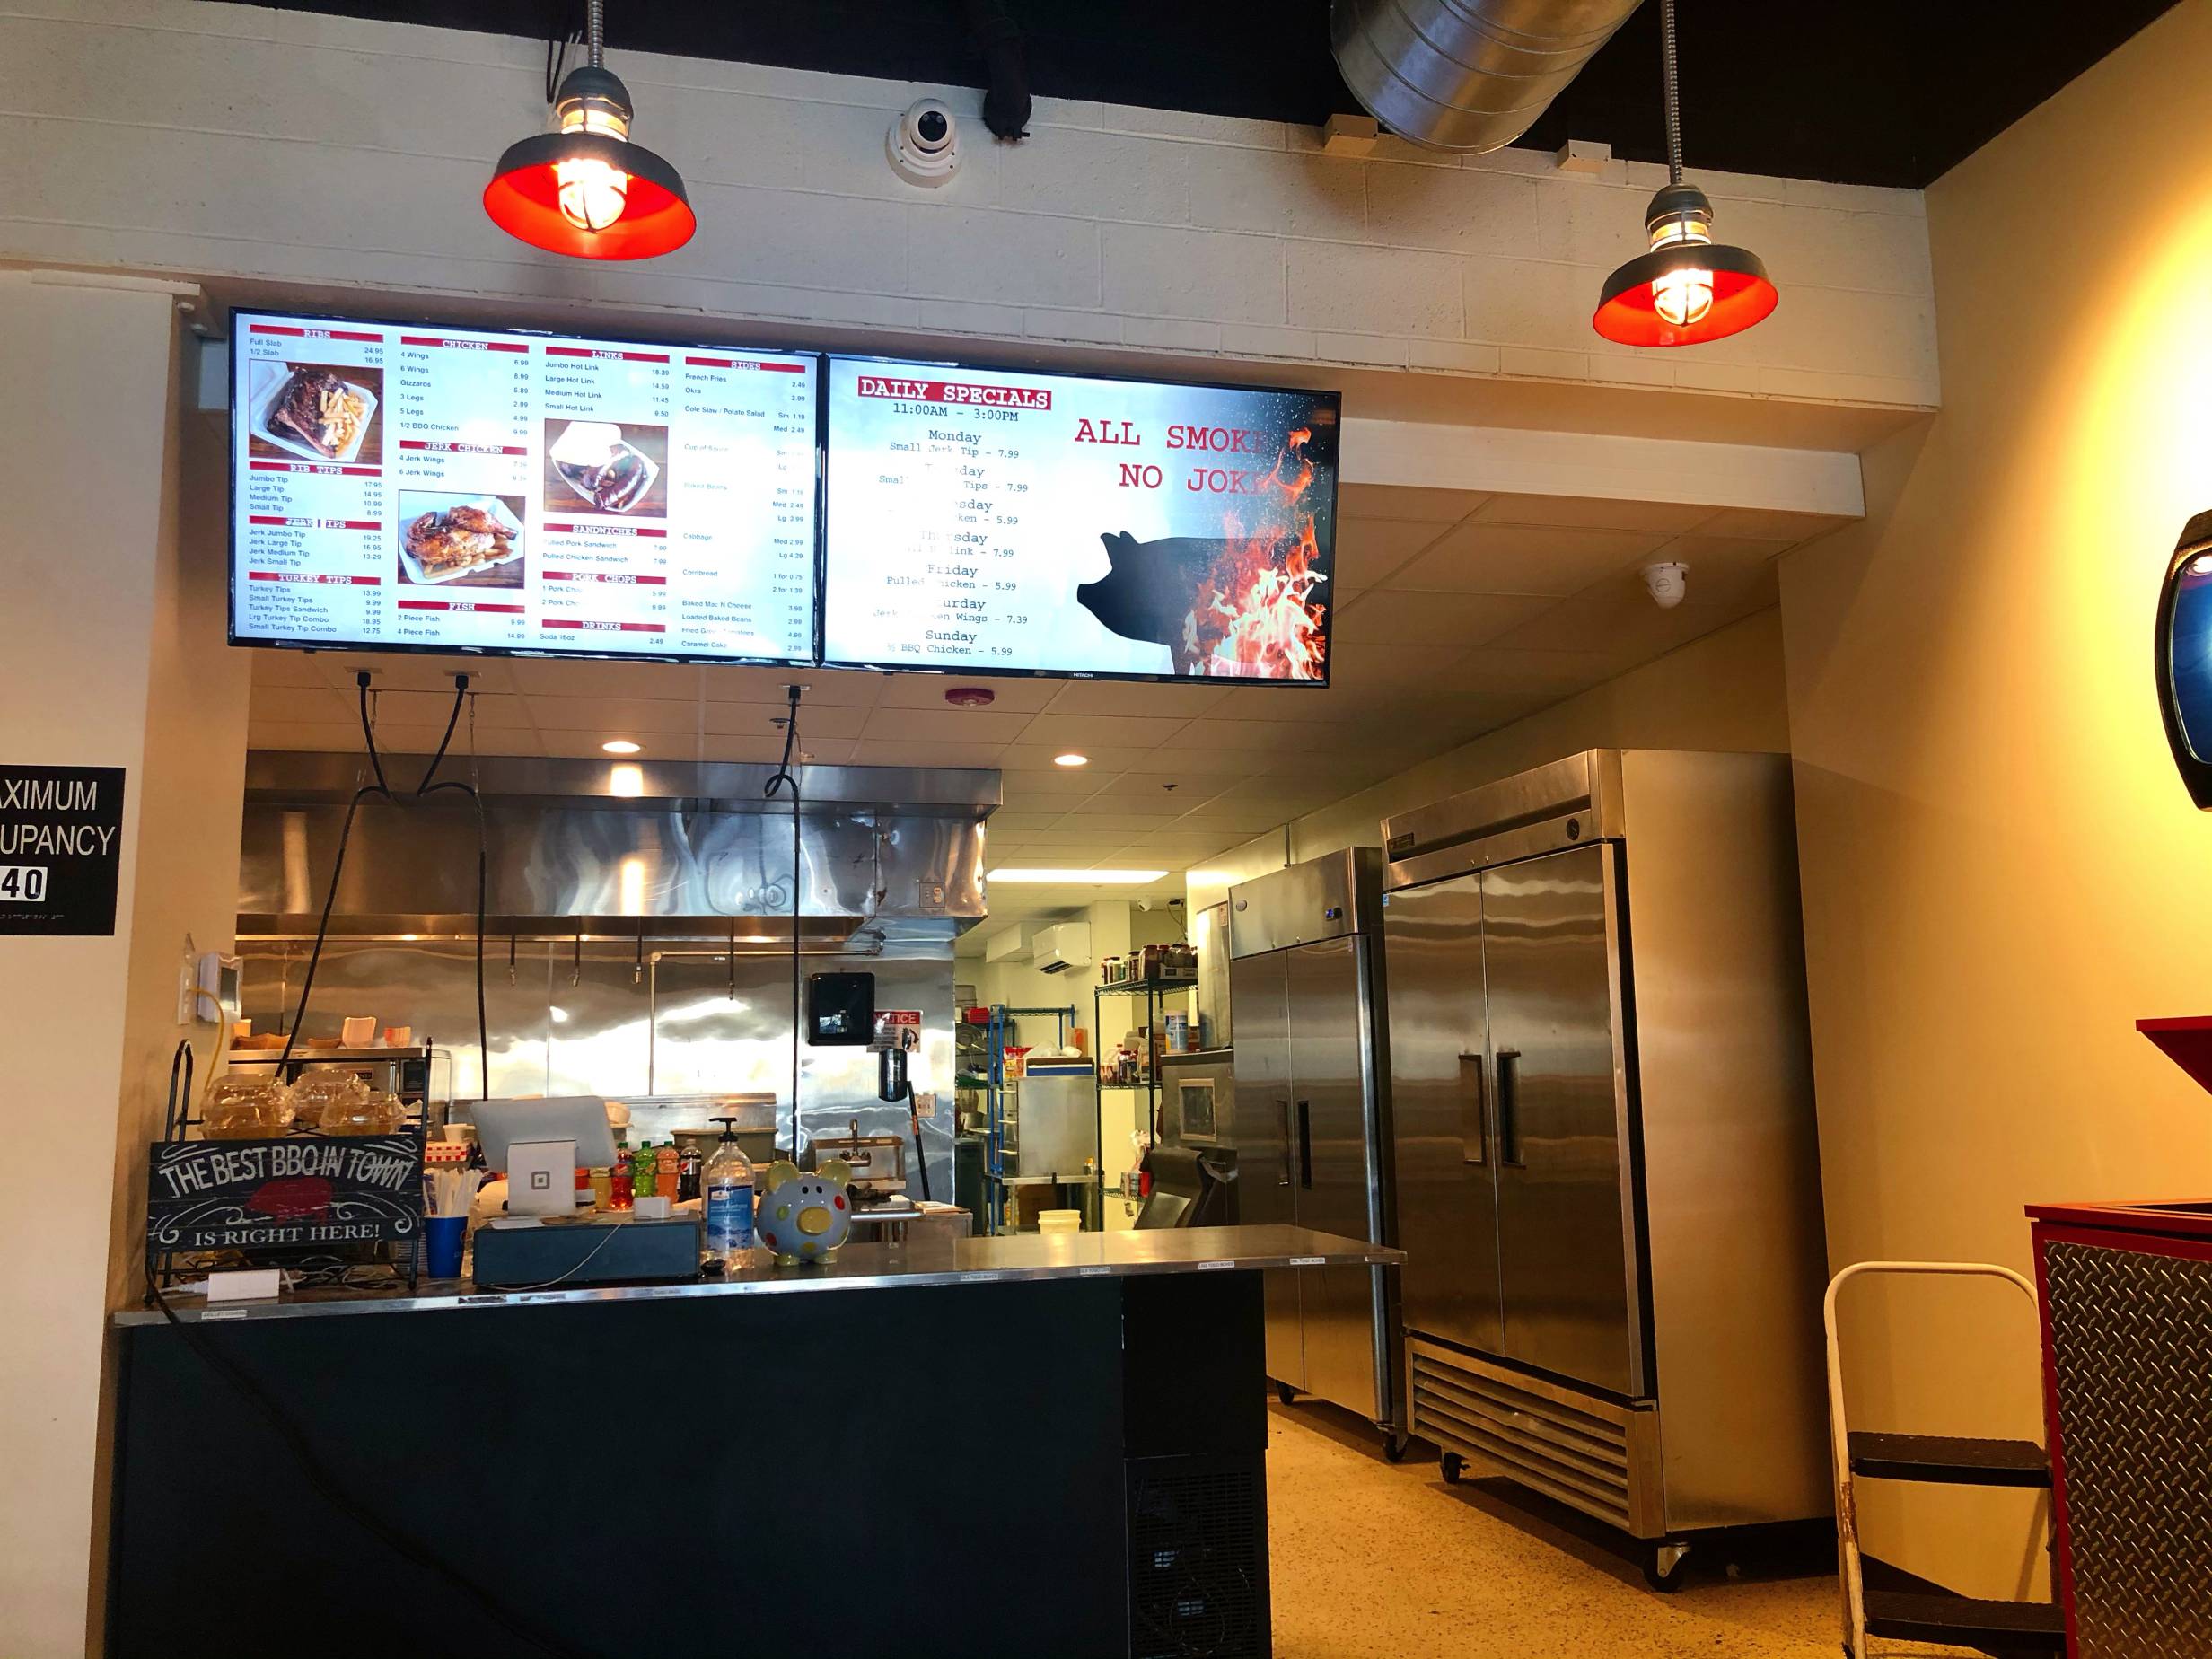 The counter inside Wood N' Hog's Champaign restaurant. A menu is hanging high above, and there are many stainless steel kitchen appliances visible. Photo by Alyssa Buckley.